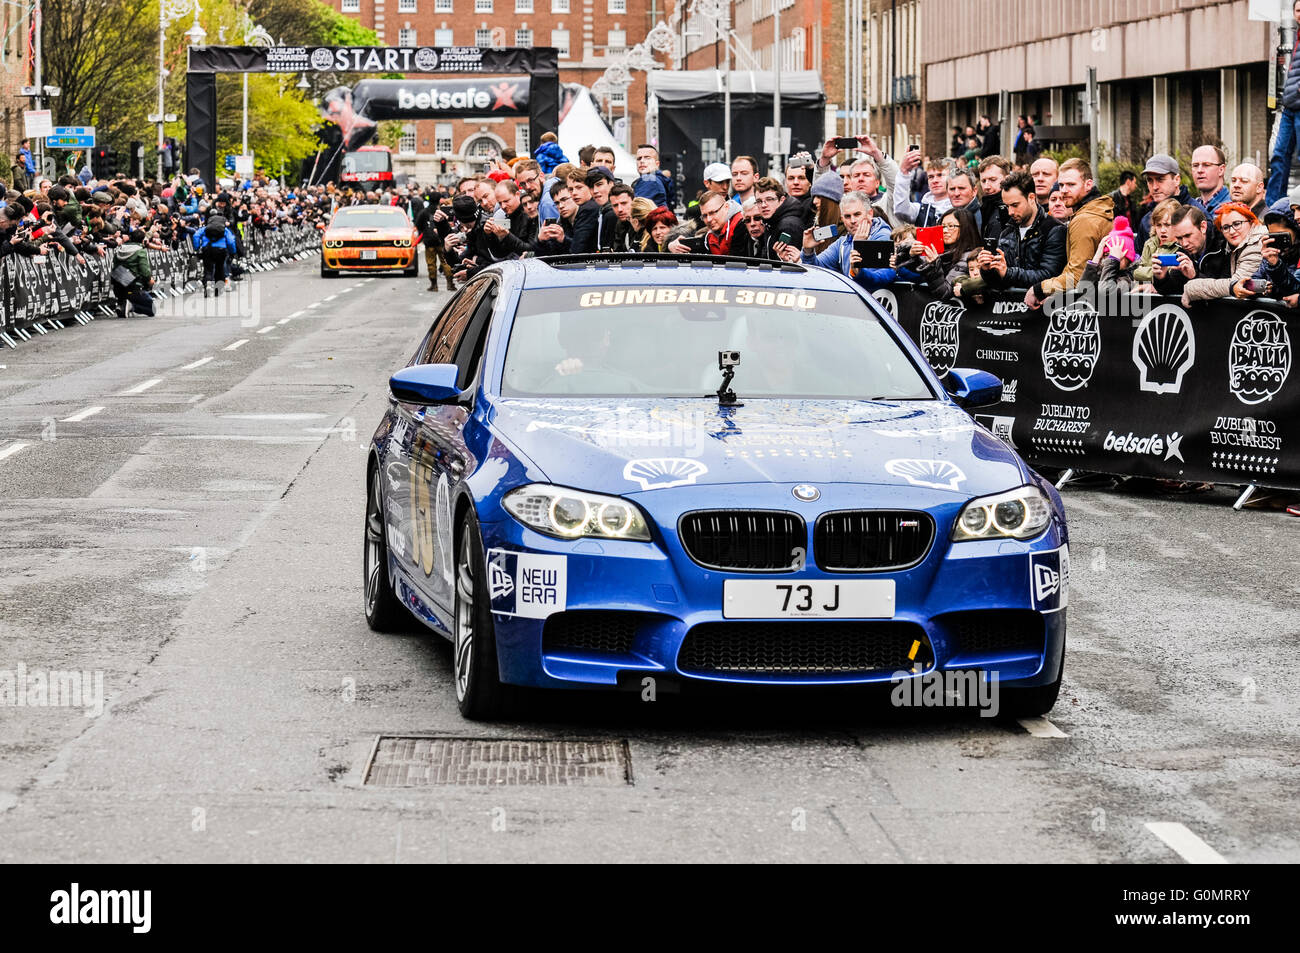 DUBLIN, IRELAND. MAY 01 2016 - A BMW M5 starts off on a 6 day drive to Bucharest from Dublin as part of the Gumball 3000 rally. Stock Photo